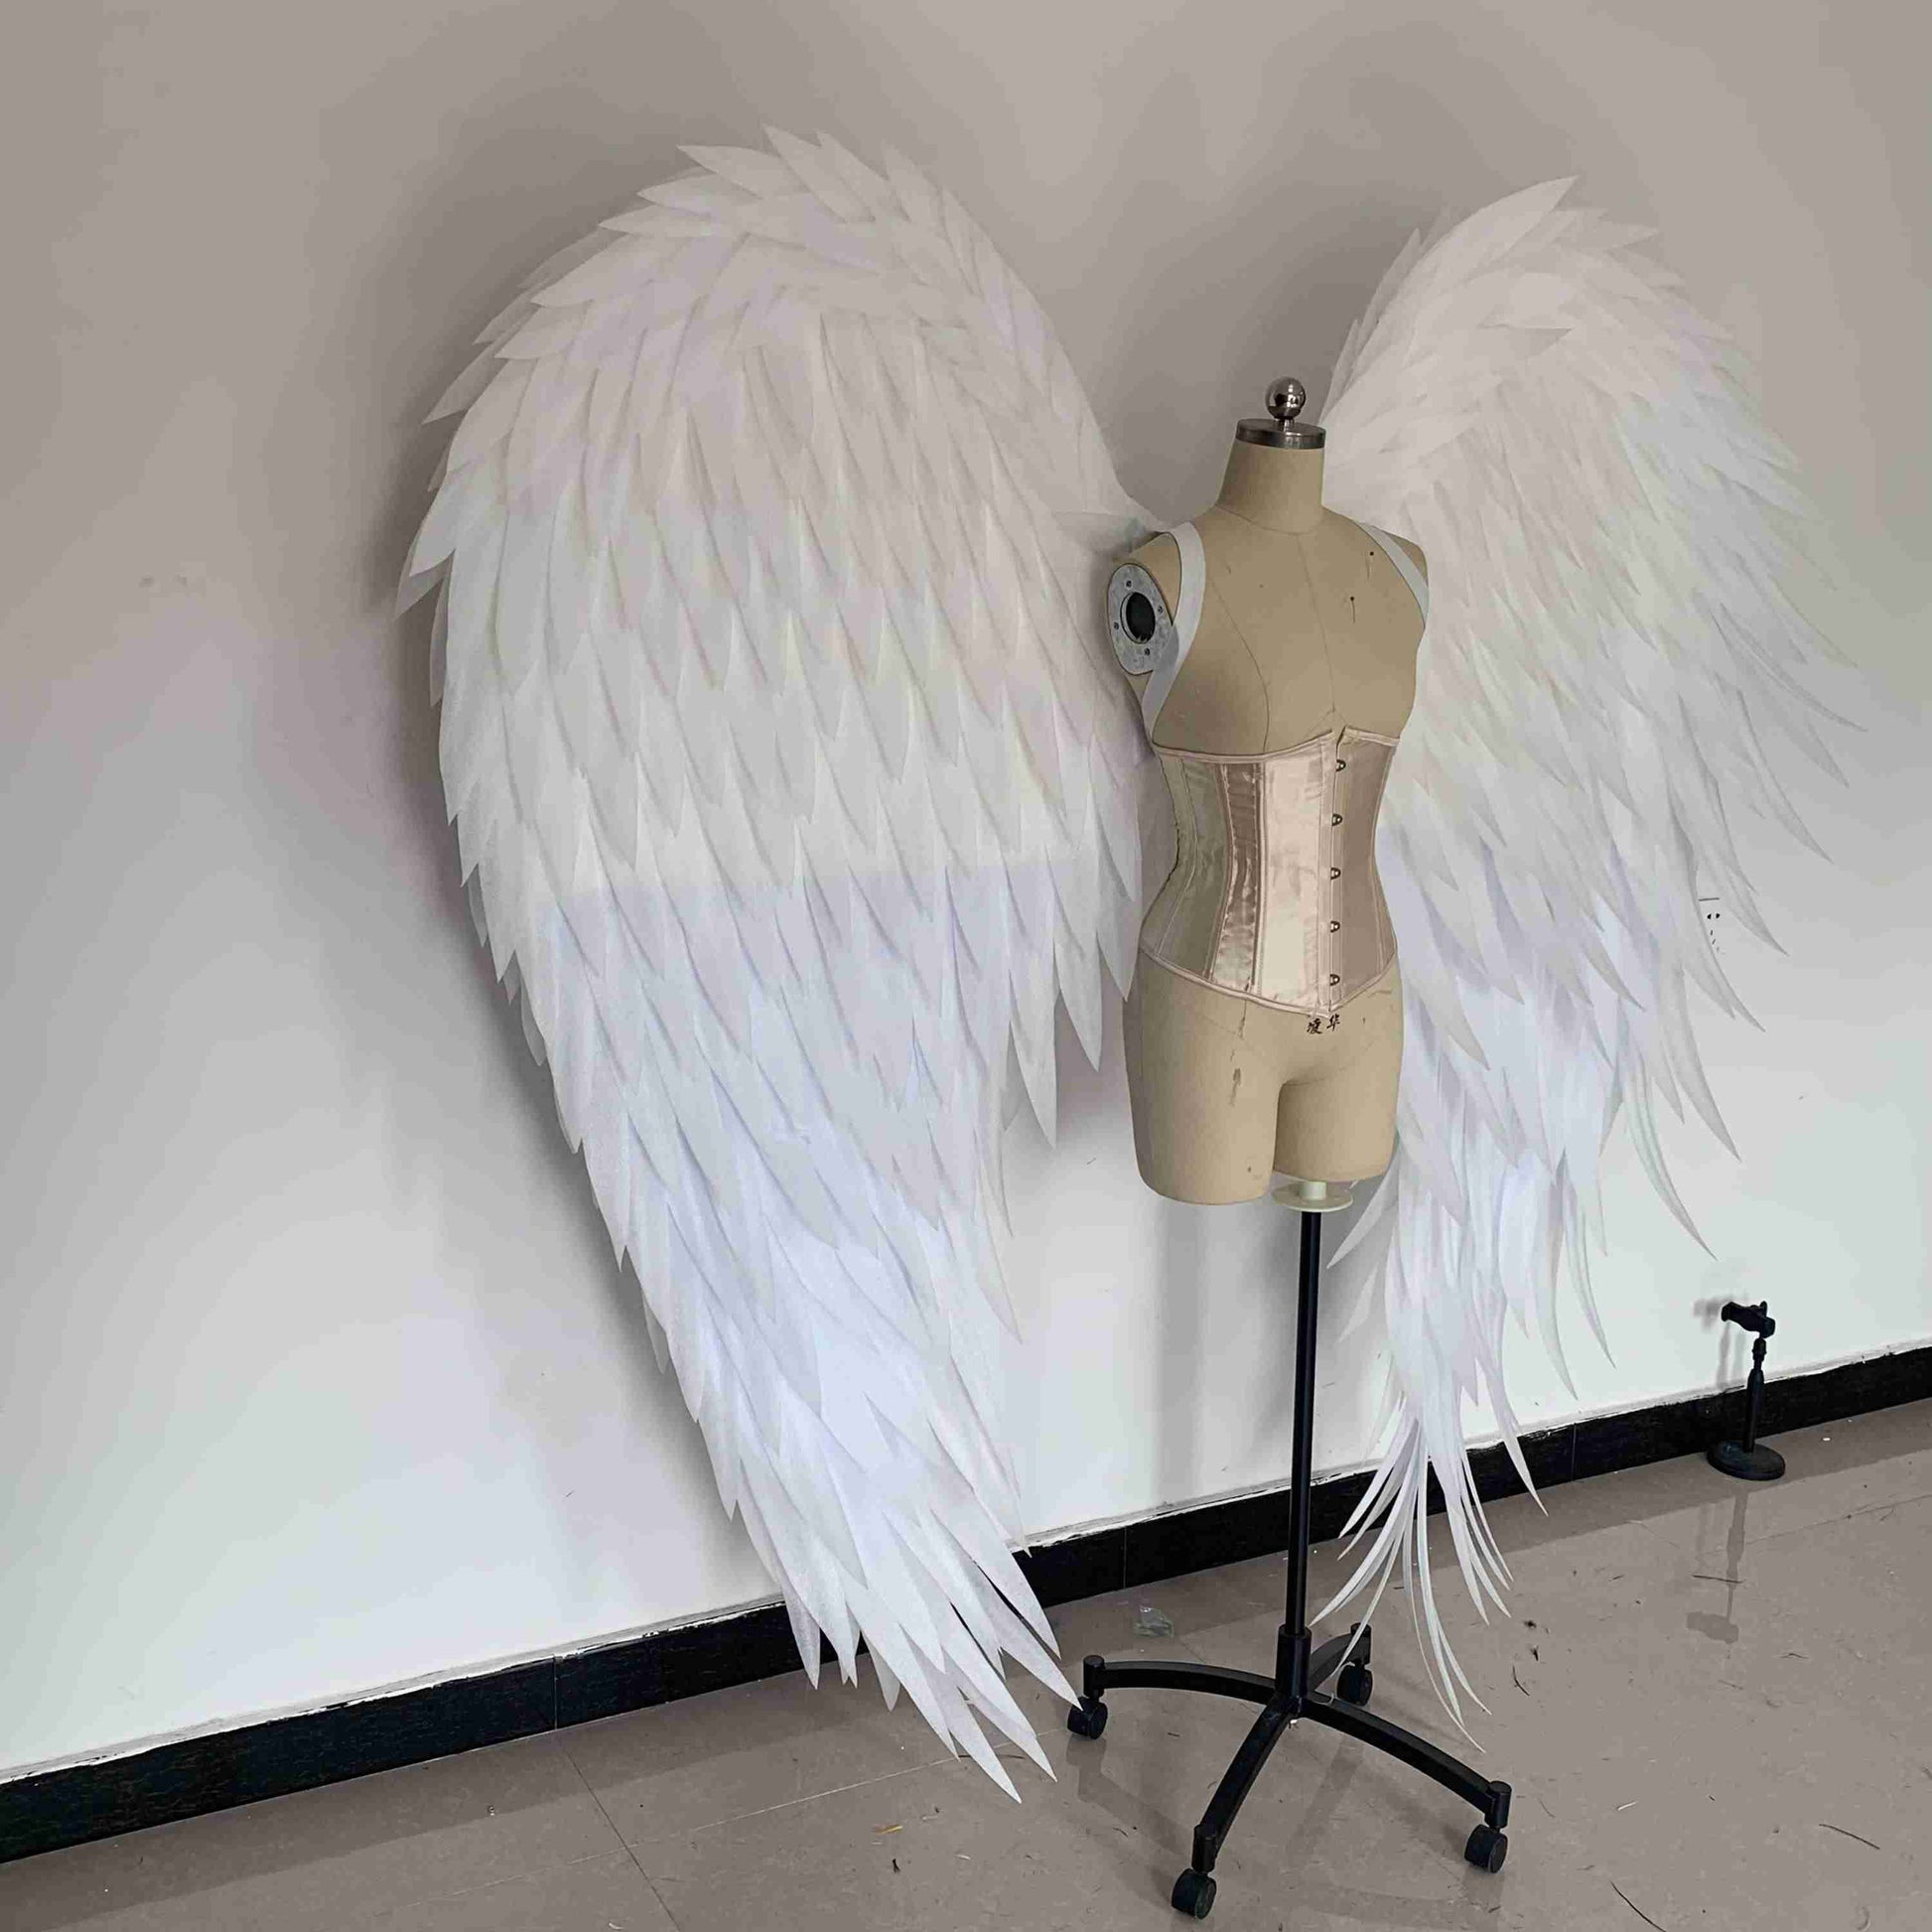 Our white angel wings from the right side. Made from pearl cotton foam. Wings for angel costume. Suitable for photoshoots.